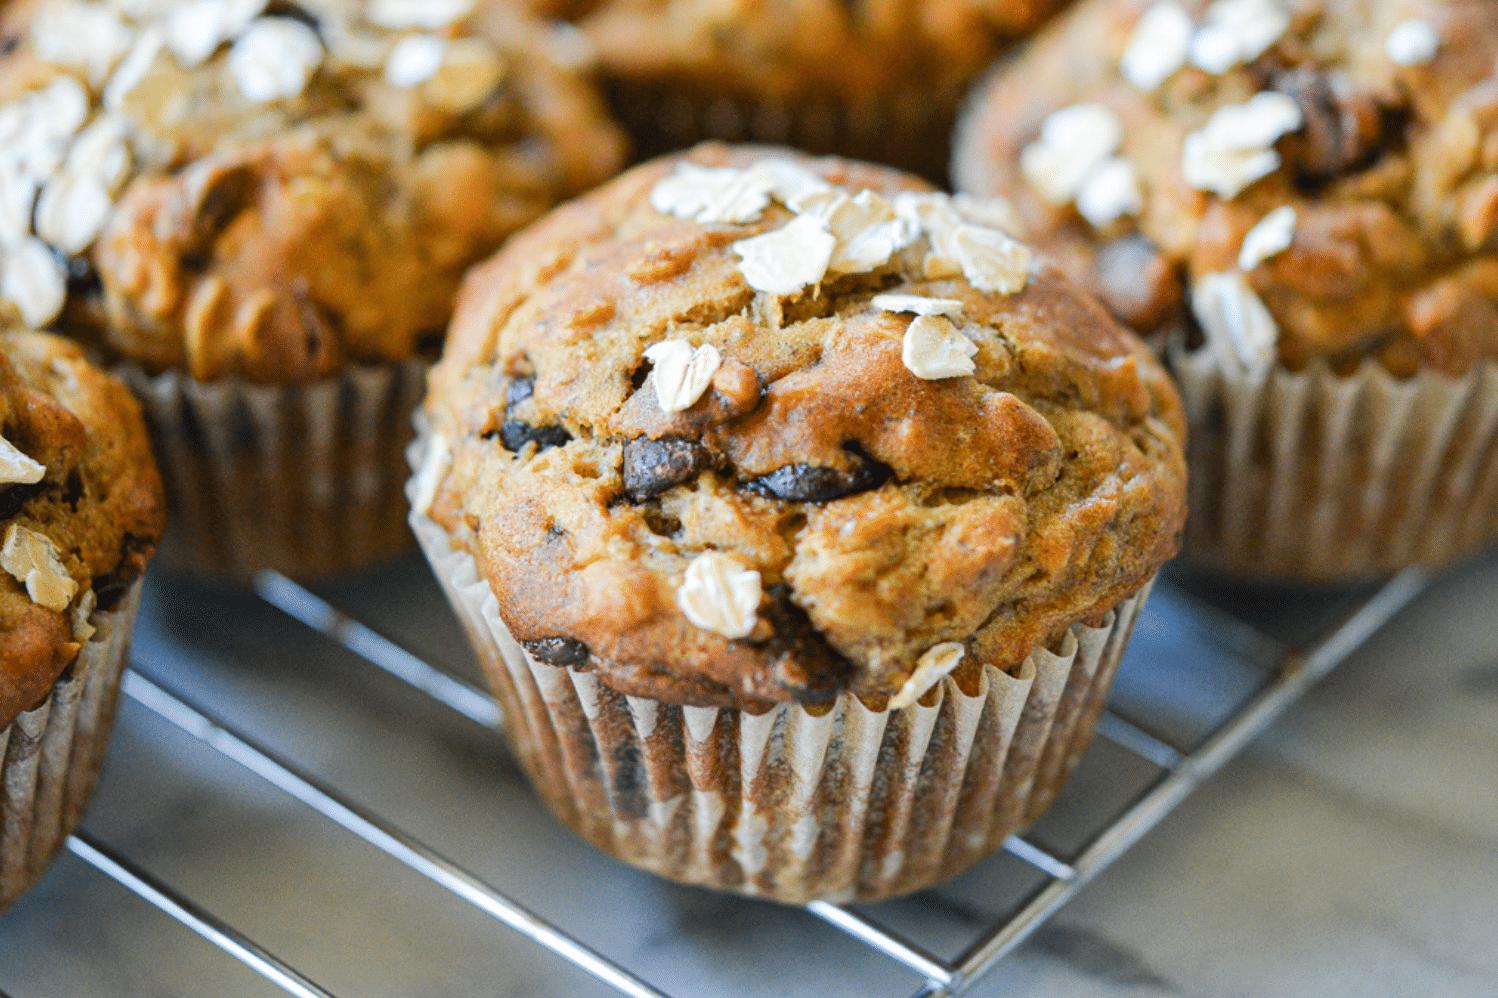  Your kitchen will smell like a bakery with these muffins in the oven.